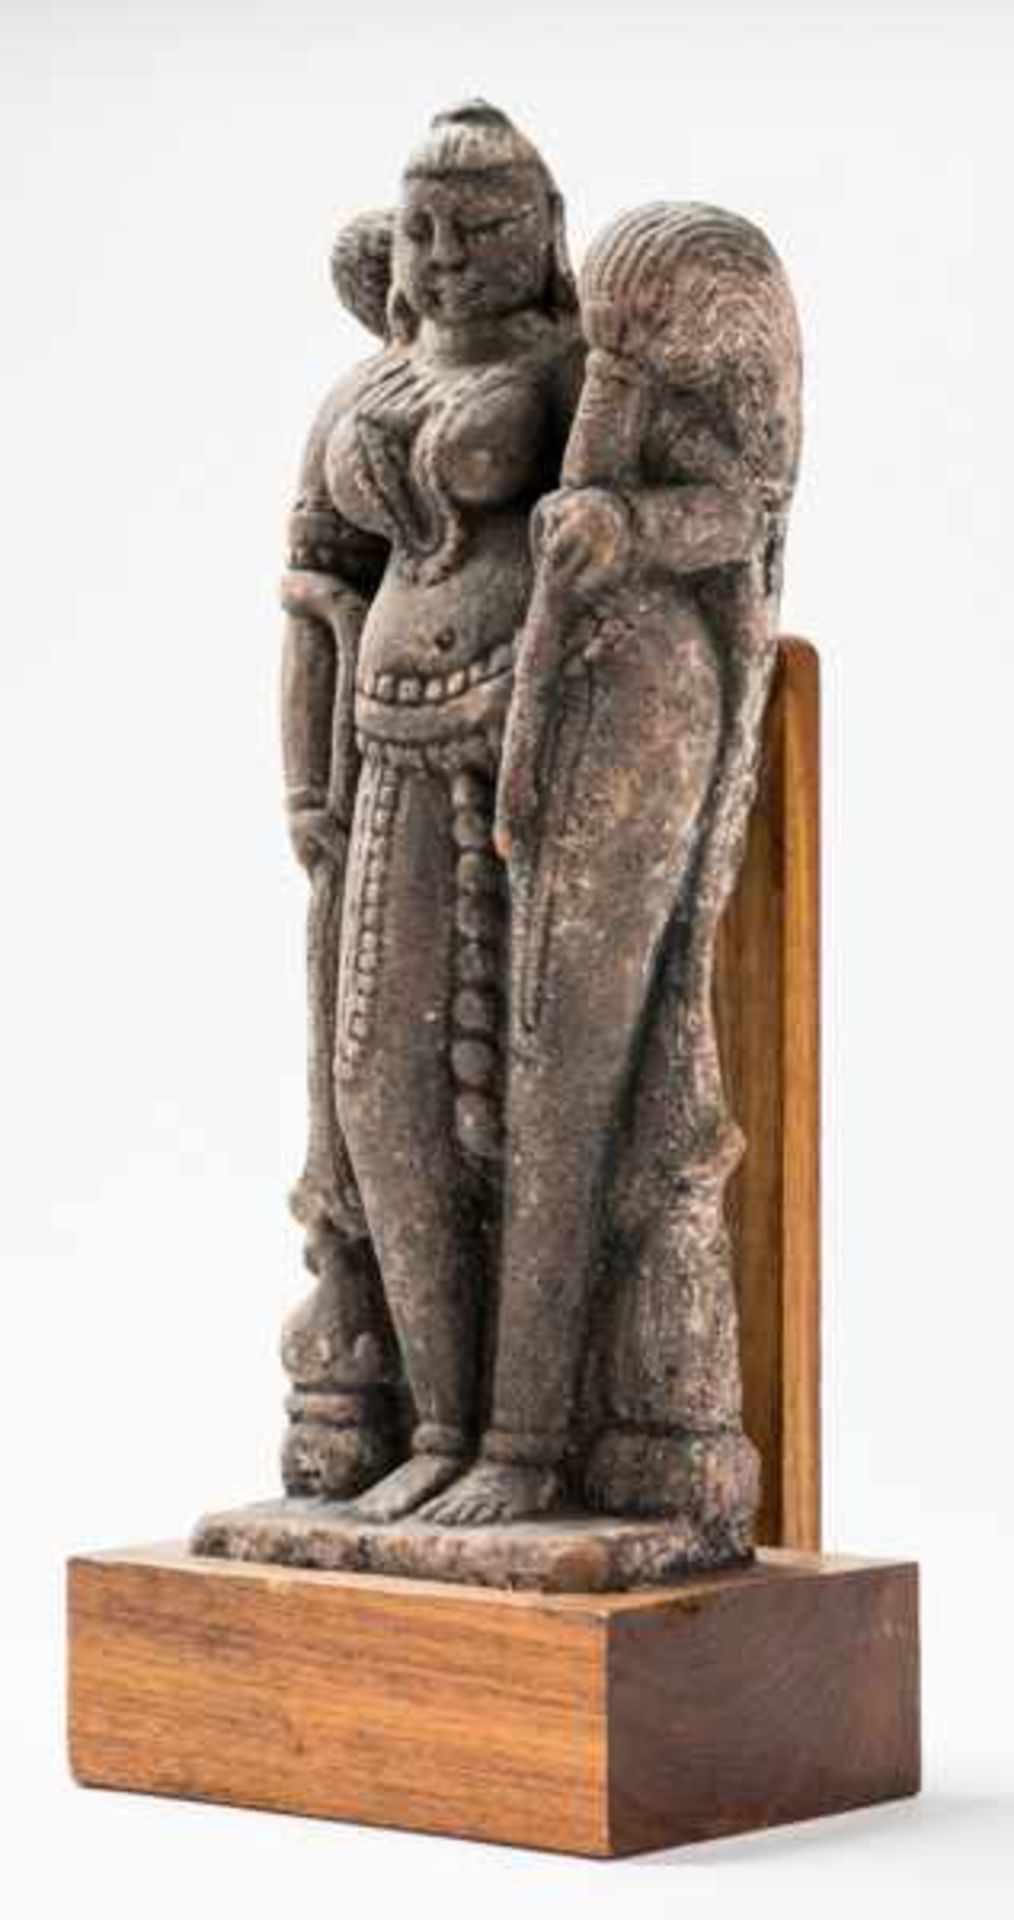 TEMPLE SCULPTURE OF A DIVINE, FEMALE MUSICIAN Sandstone. Madhya Pradesh, Northern India, probably - Image 2 of 3